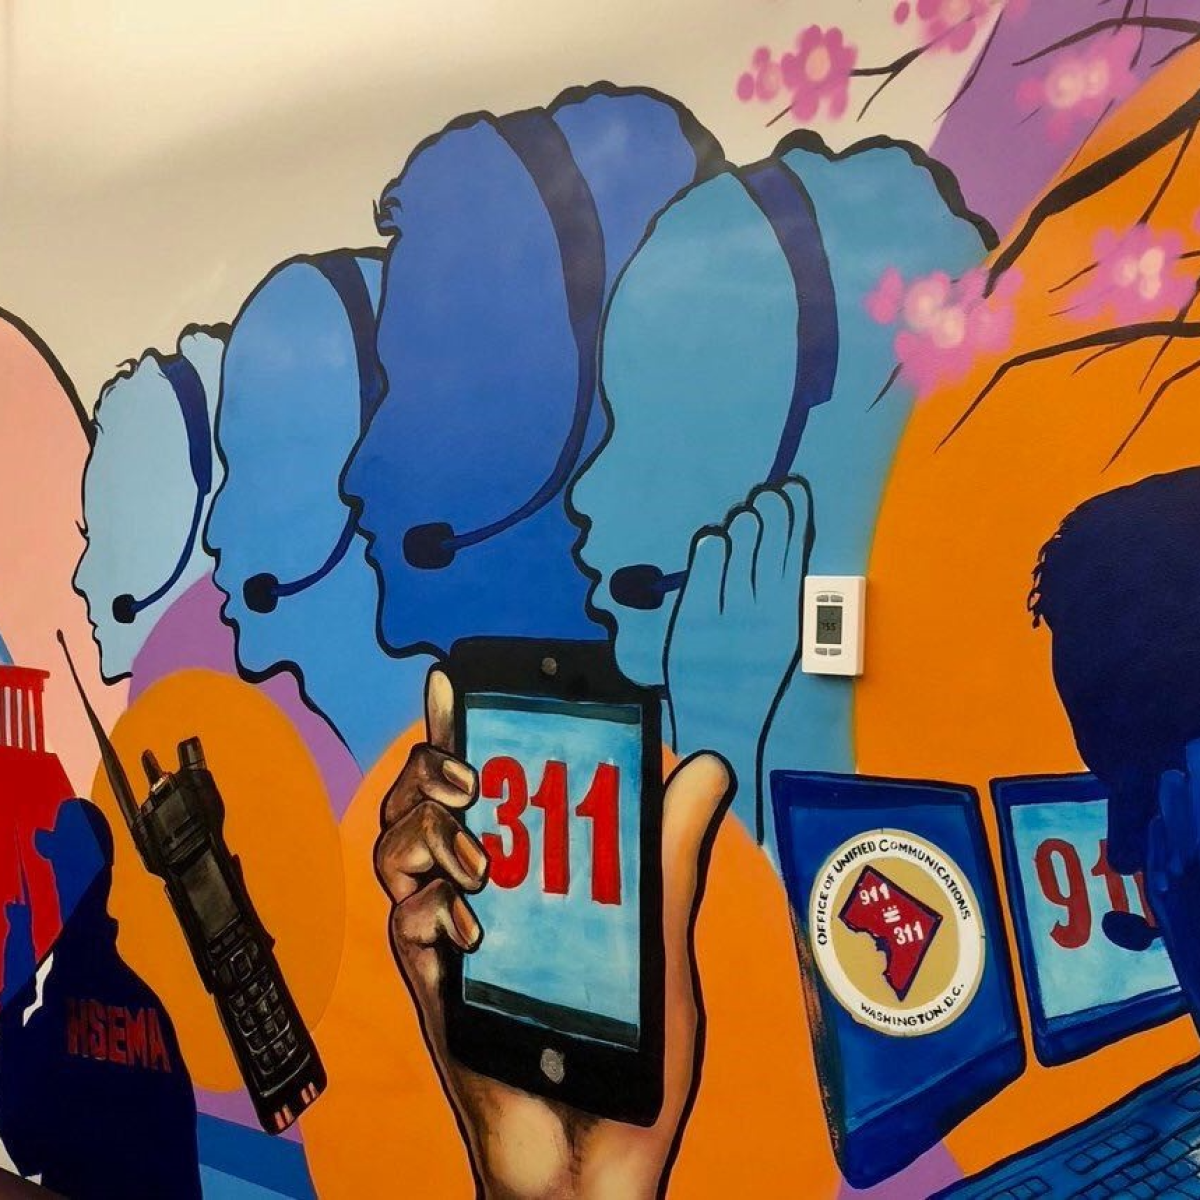 Mural at the OUC office